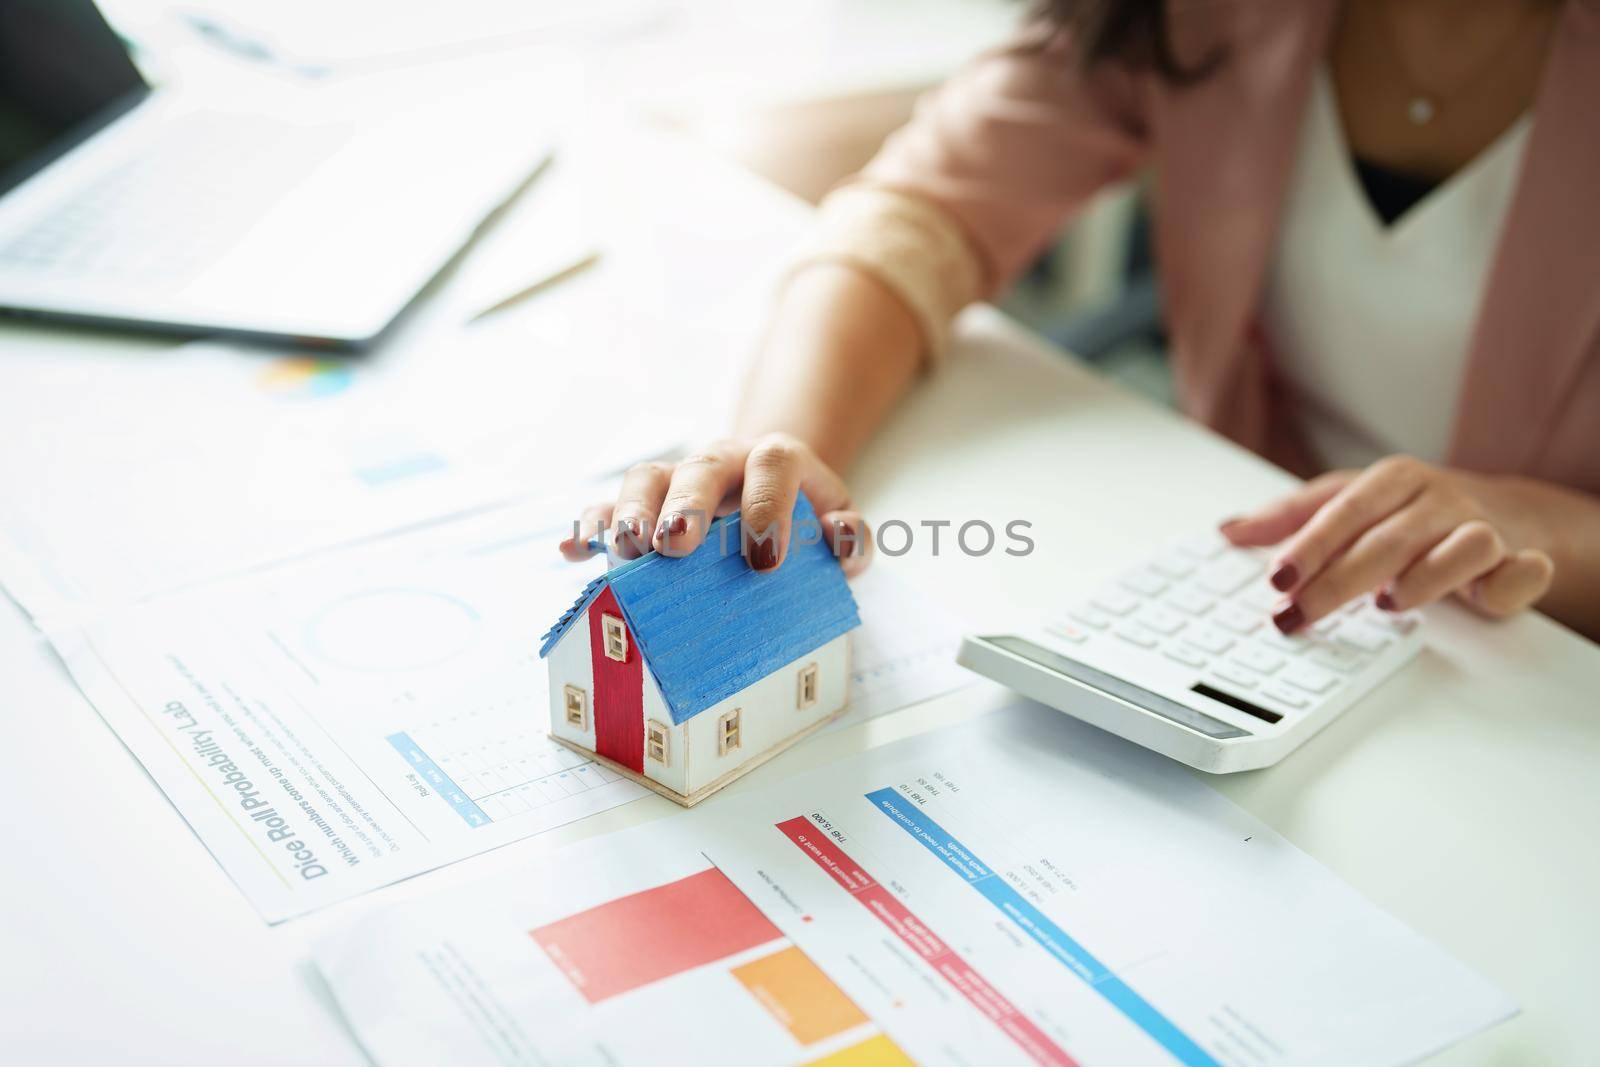 agents, land purchases and sales, property taxes,focus model house with real estate owners are using calculators to calculate home and land tax expenditures to manage financial and investment risks. by Manastrong